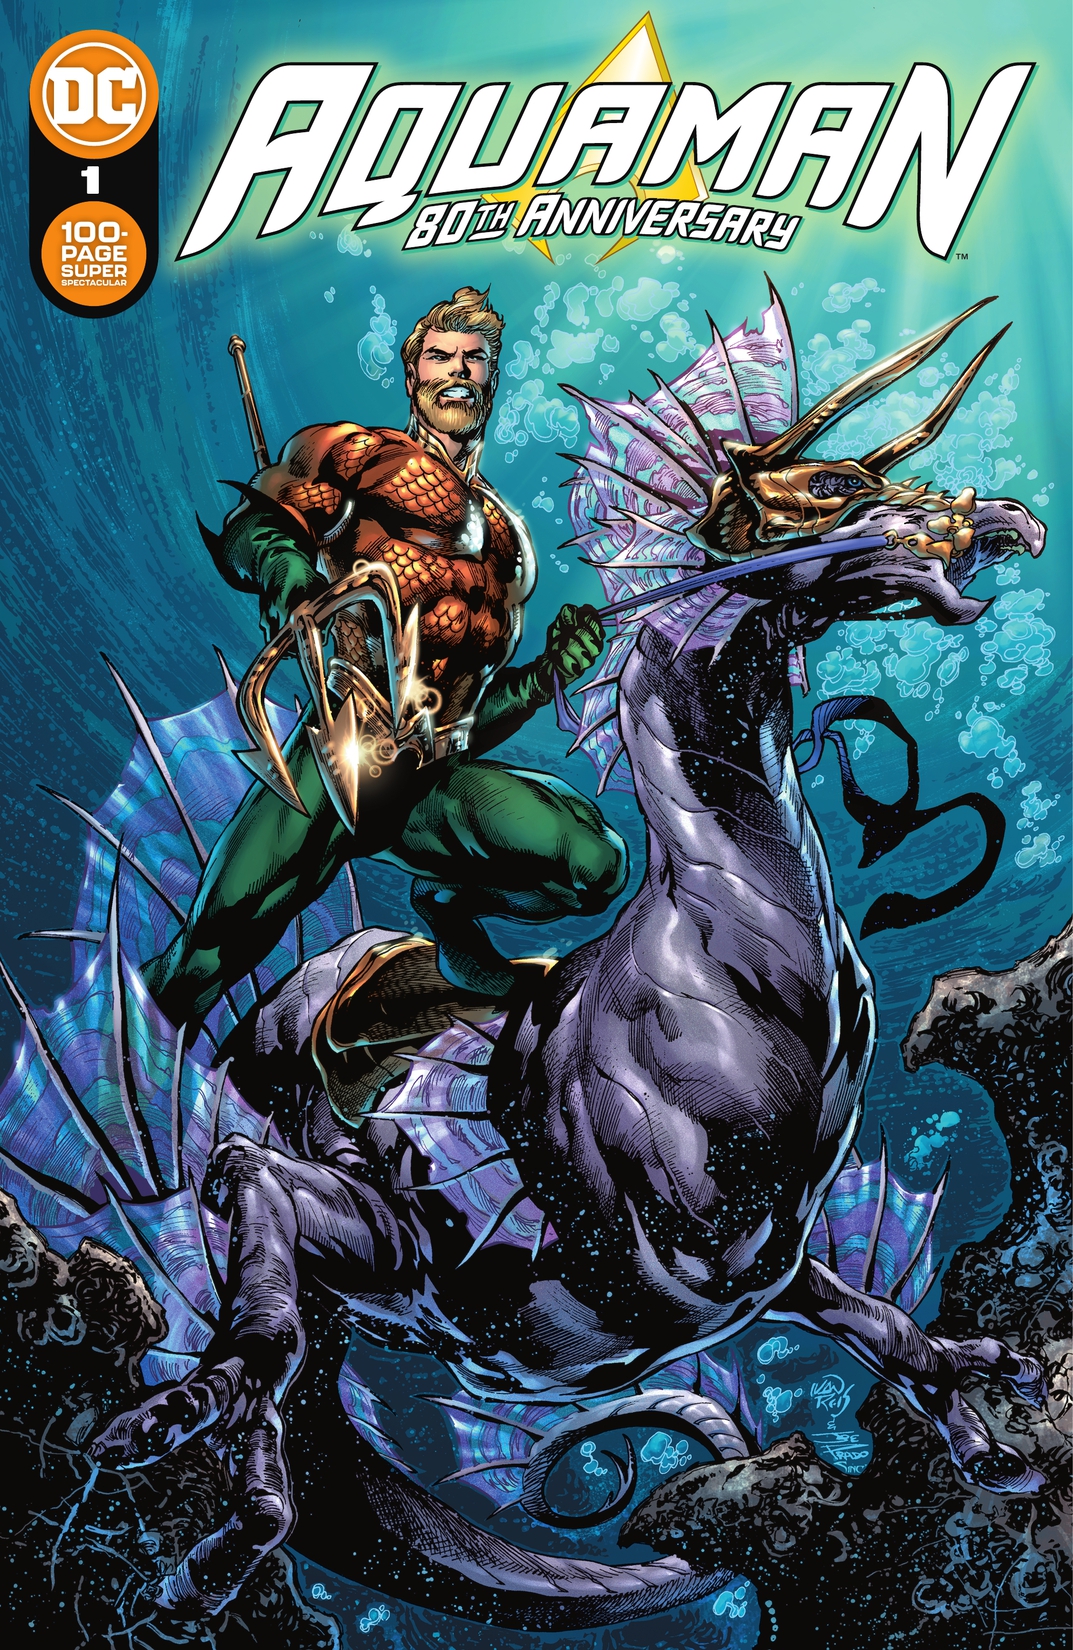 Aquaman 80th Anniversary 100-Page Super Spectacular (2021) #1 preview images